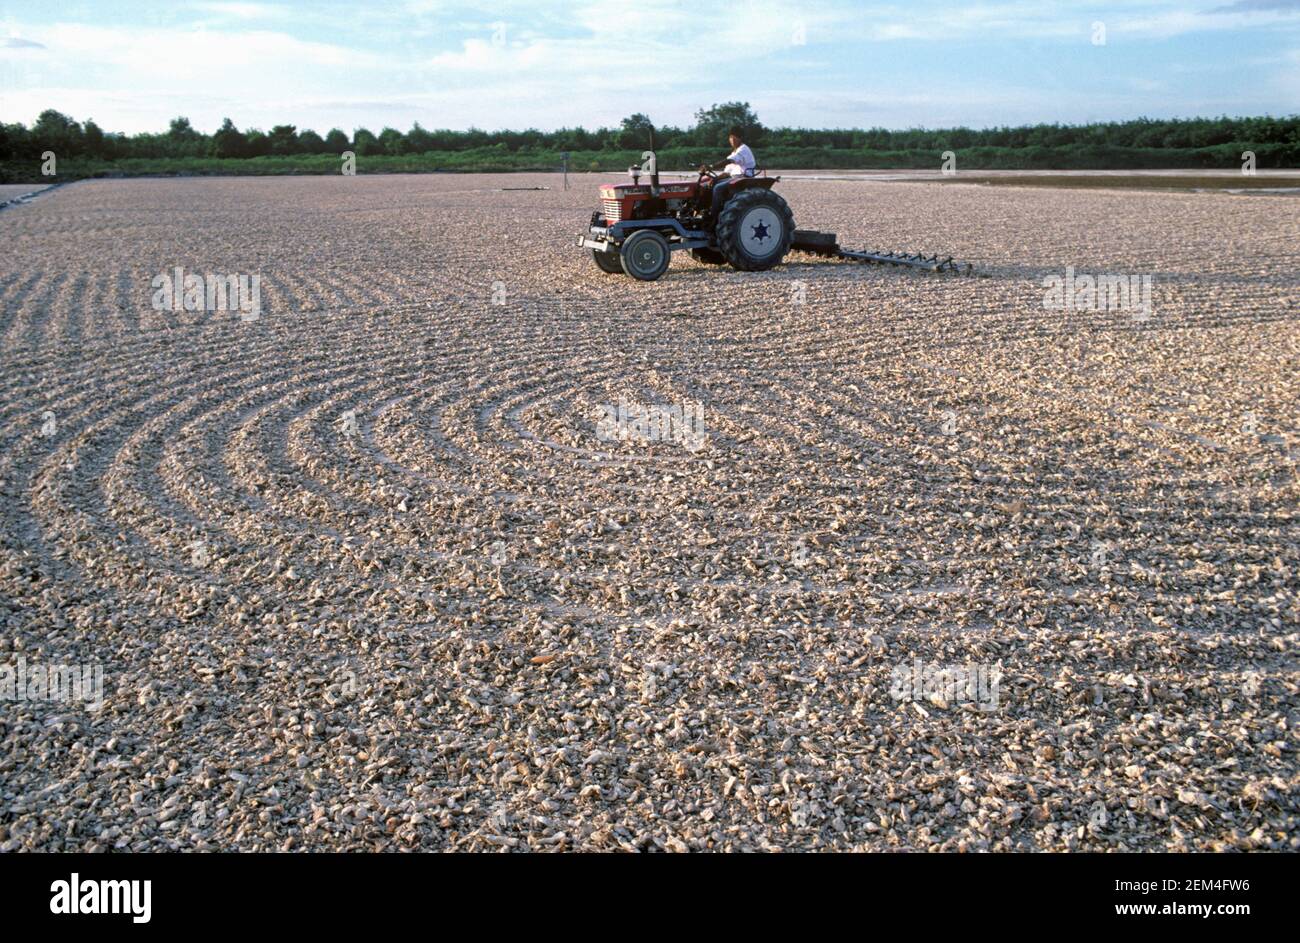 Small tractor raking and sun drying chopped cassava or manioc (Manihot esculenta) starchy root chips for carbohydrate, tapioca, Thailand Stock Photo